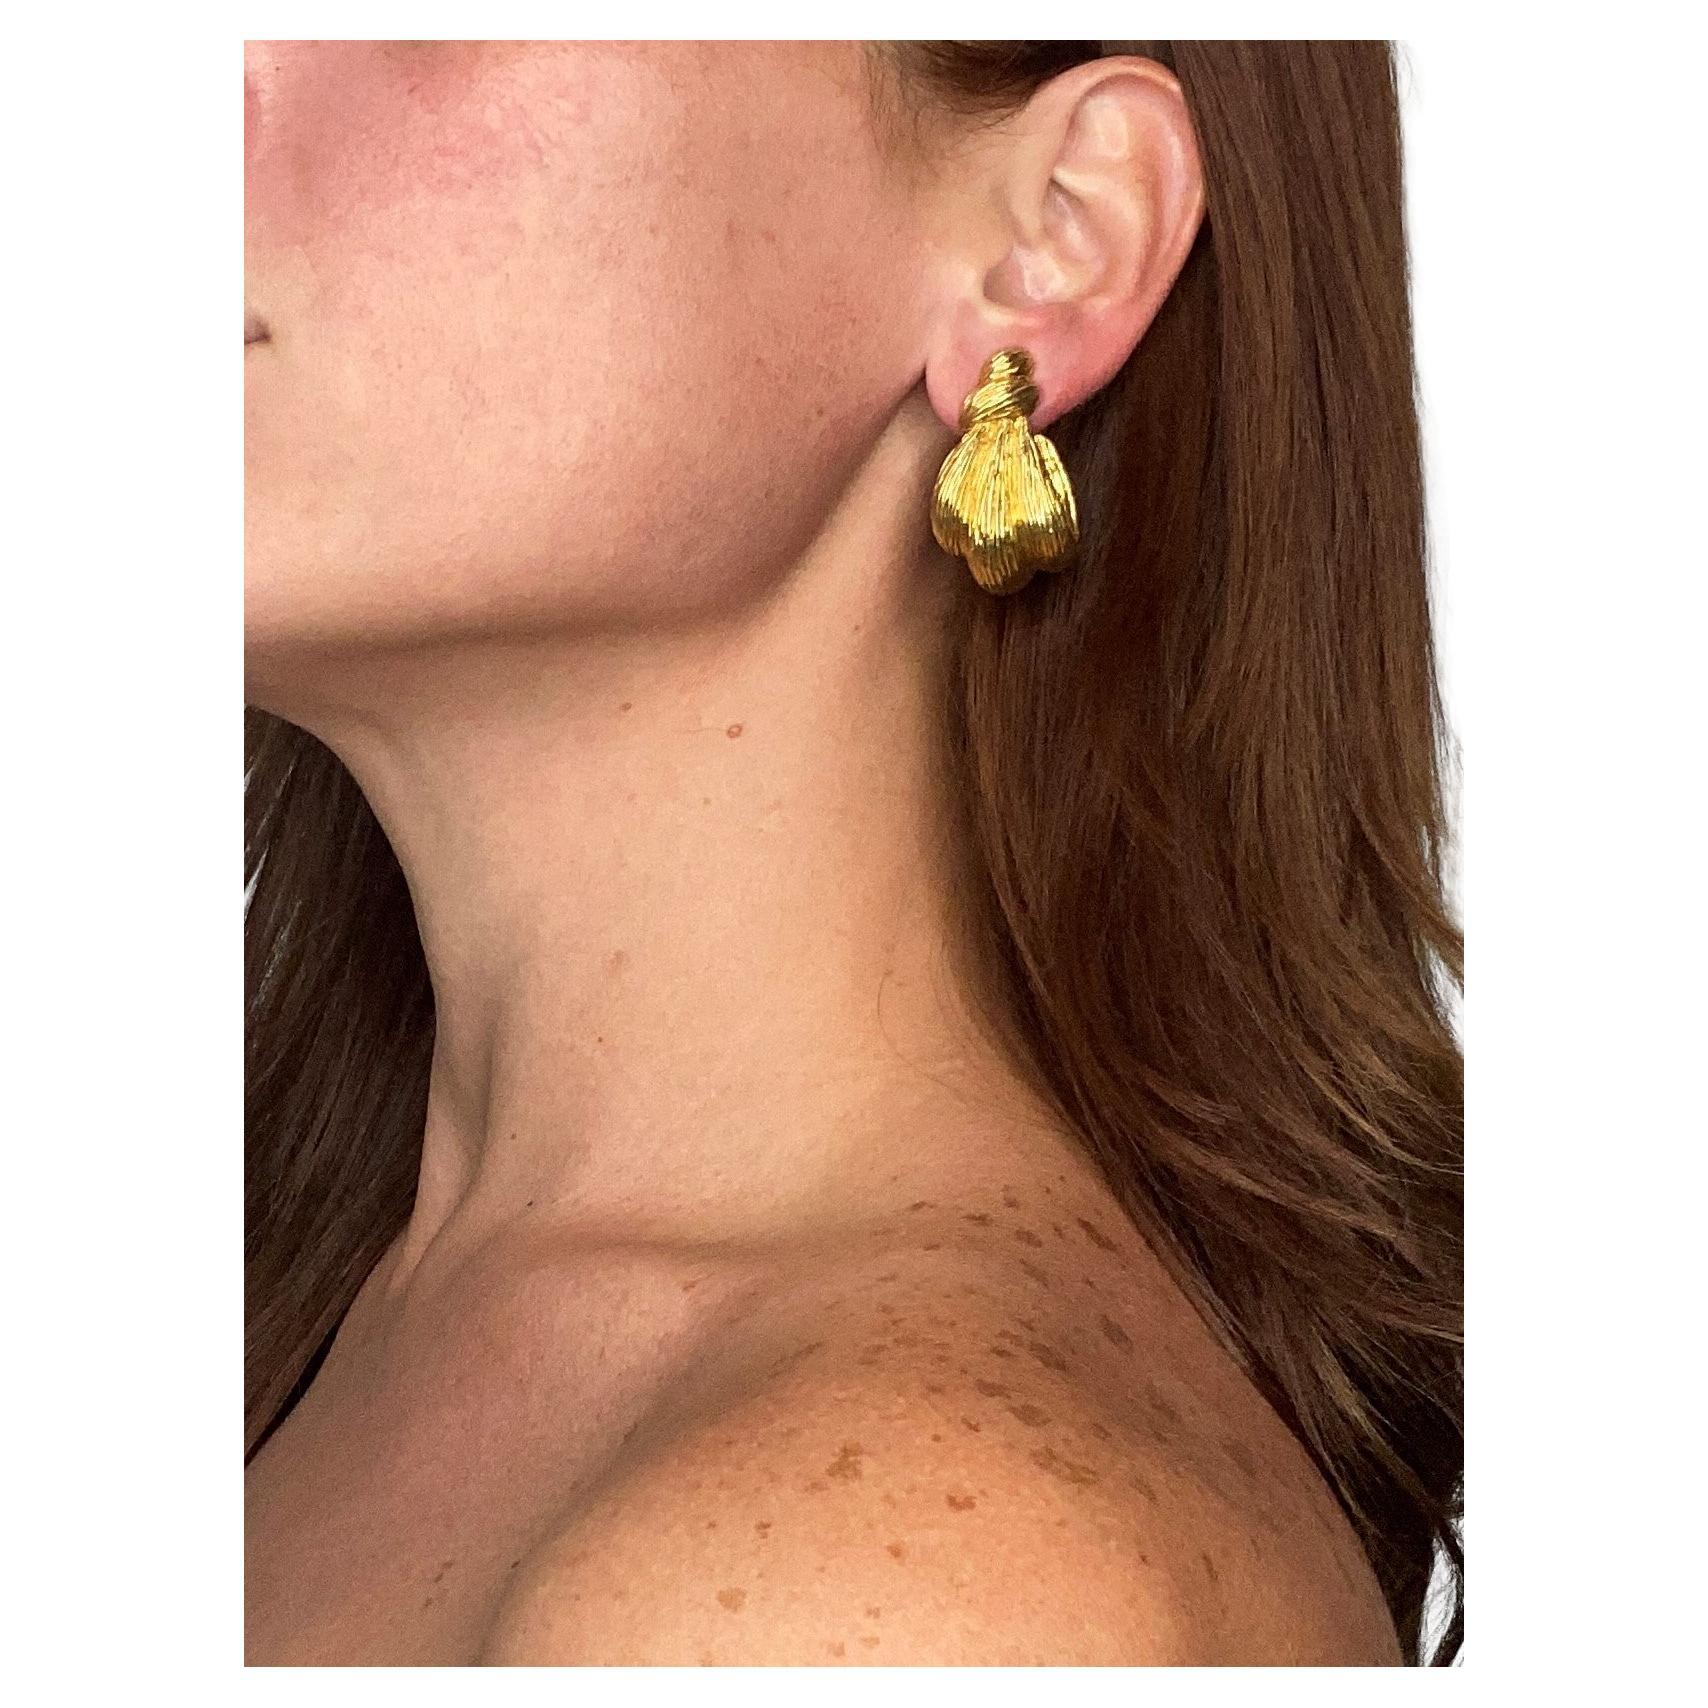 Wrapped knots clips earrings designed by Robert Wander.

An oversized unusual bold pair created at the atelier of Robert Wander for Wander France, back in the 1960's. These beautiful clips earrings has been crafted with a wrapped knots patterns in